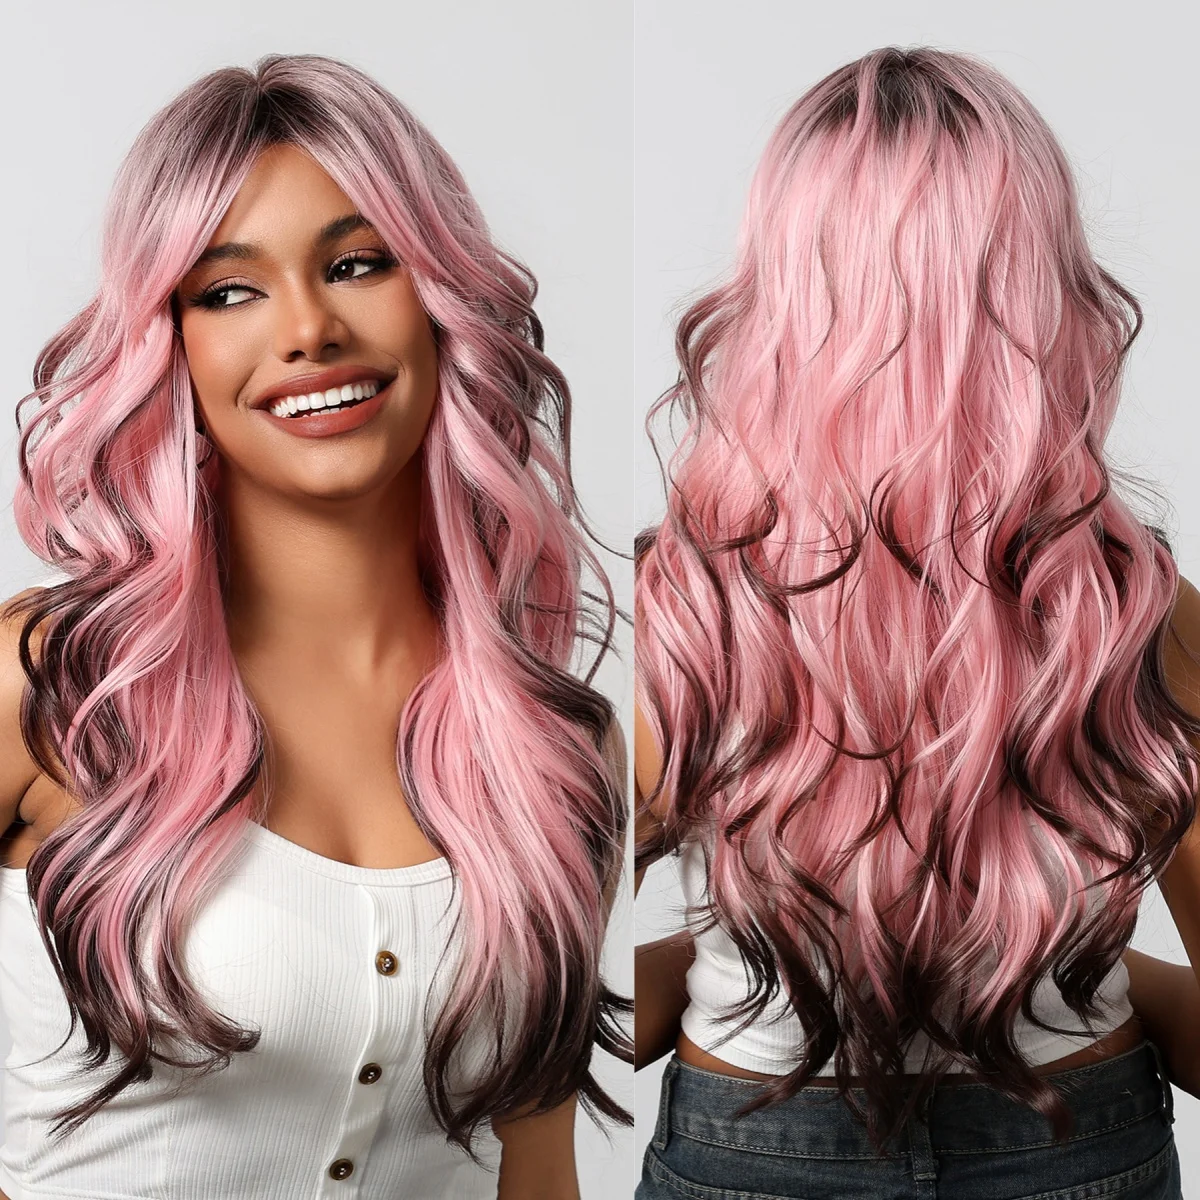 

Fluffy Ombre Pink Synthetic Curly Wigs for Black Women Long Wavy Pink Hair Wigs with Bangs Natural Party High Temperature Fiber